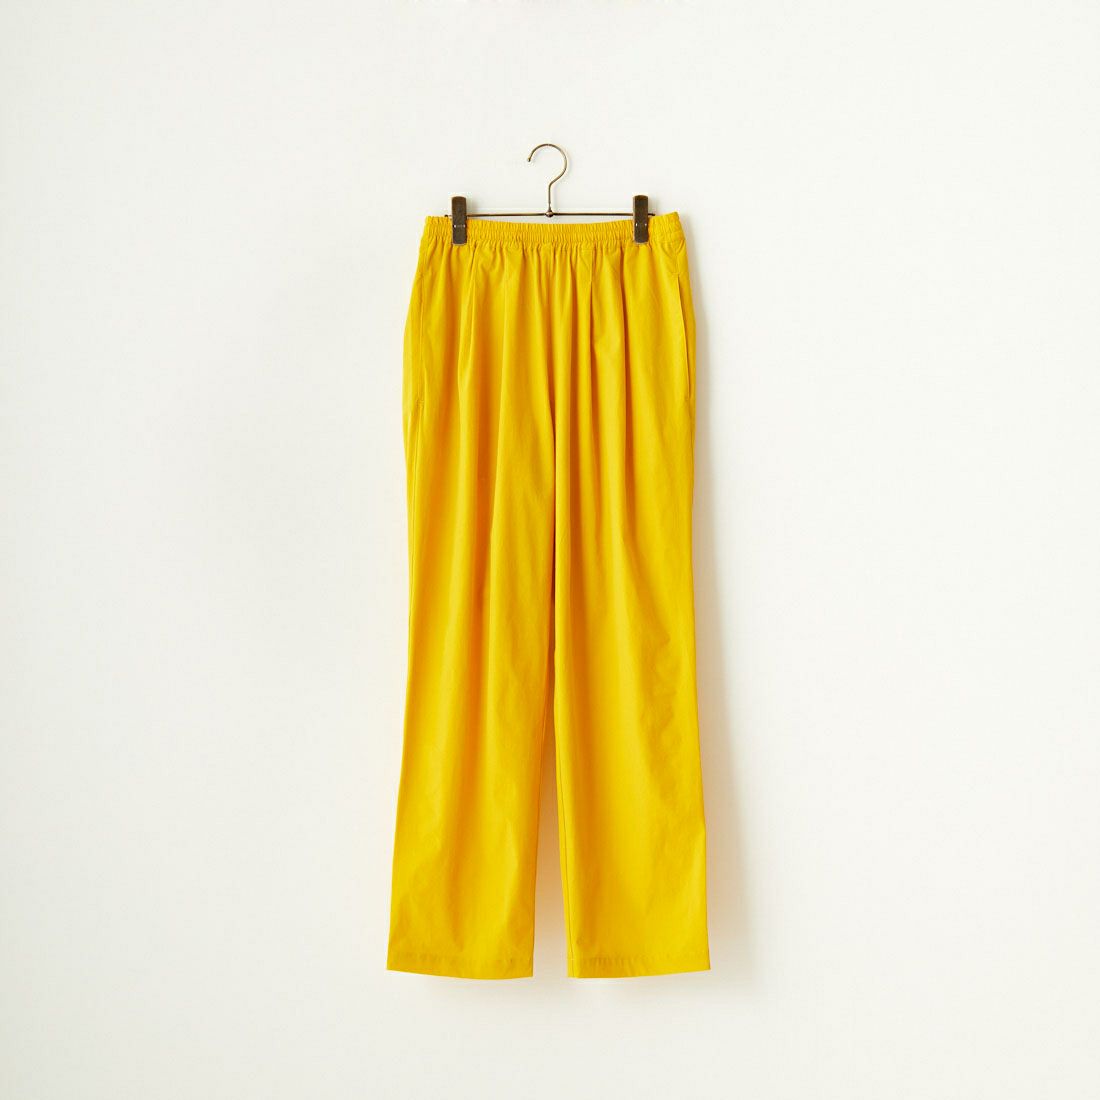 Jeans Factory Clothes [ジーンズファクトリークローズ] 7DAYSナイロンイージーパンツ [IN6-PT-4]YELLOW